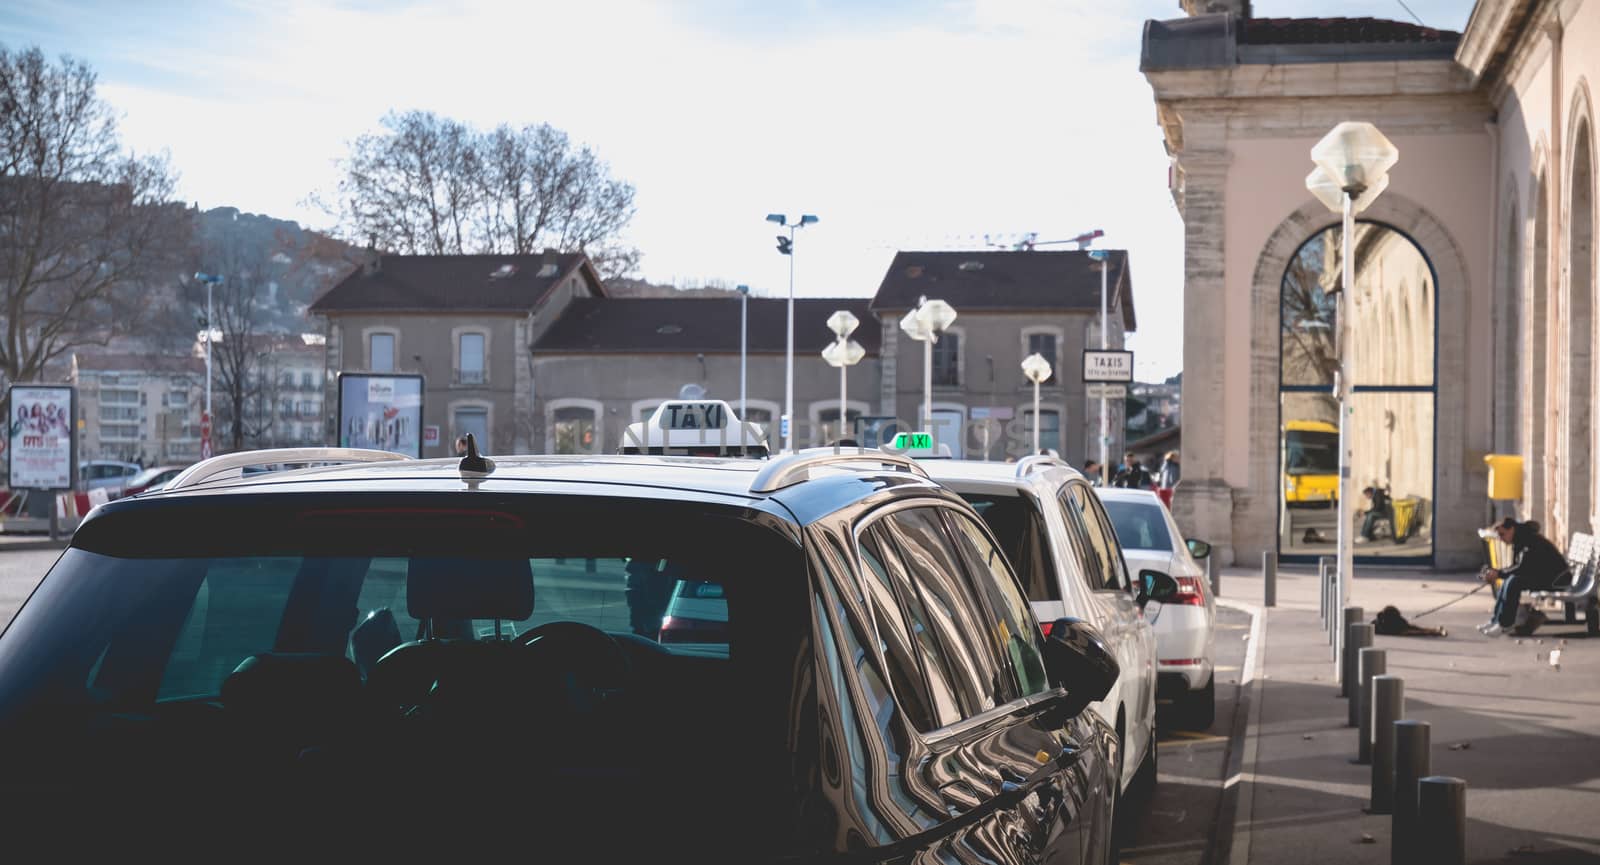 Taxi line in front of the train station of Sete, France by AtlanticEUROSTOXX